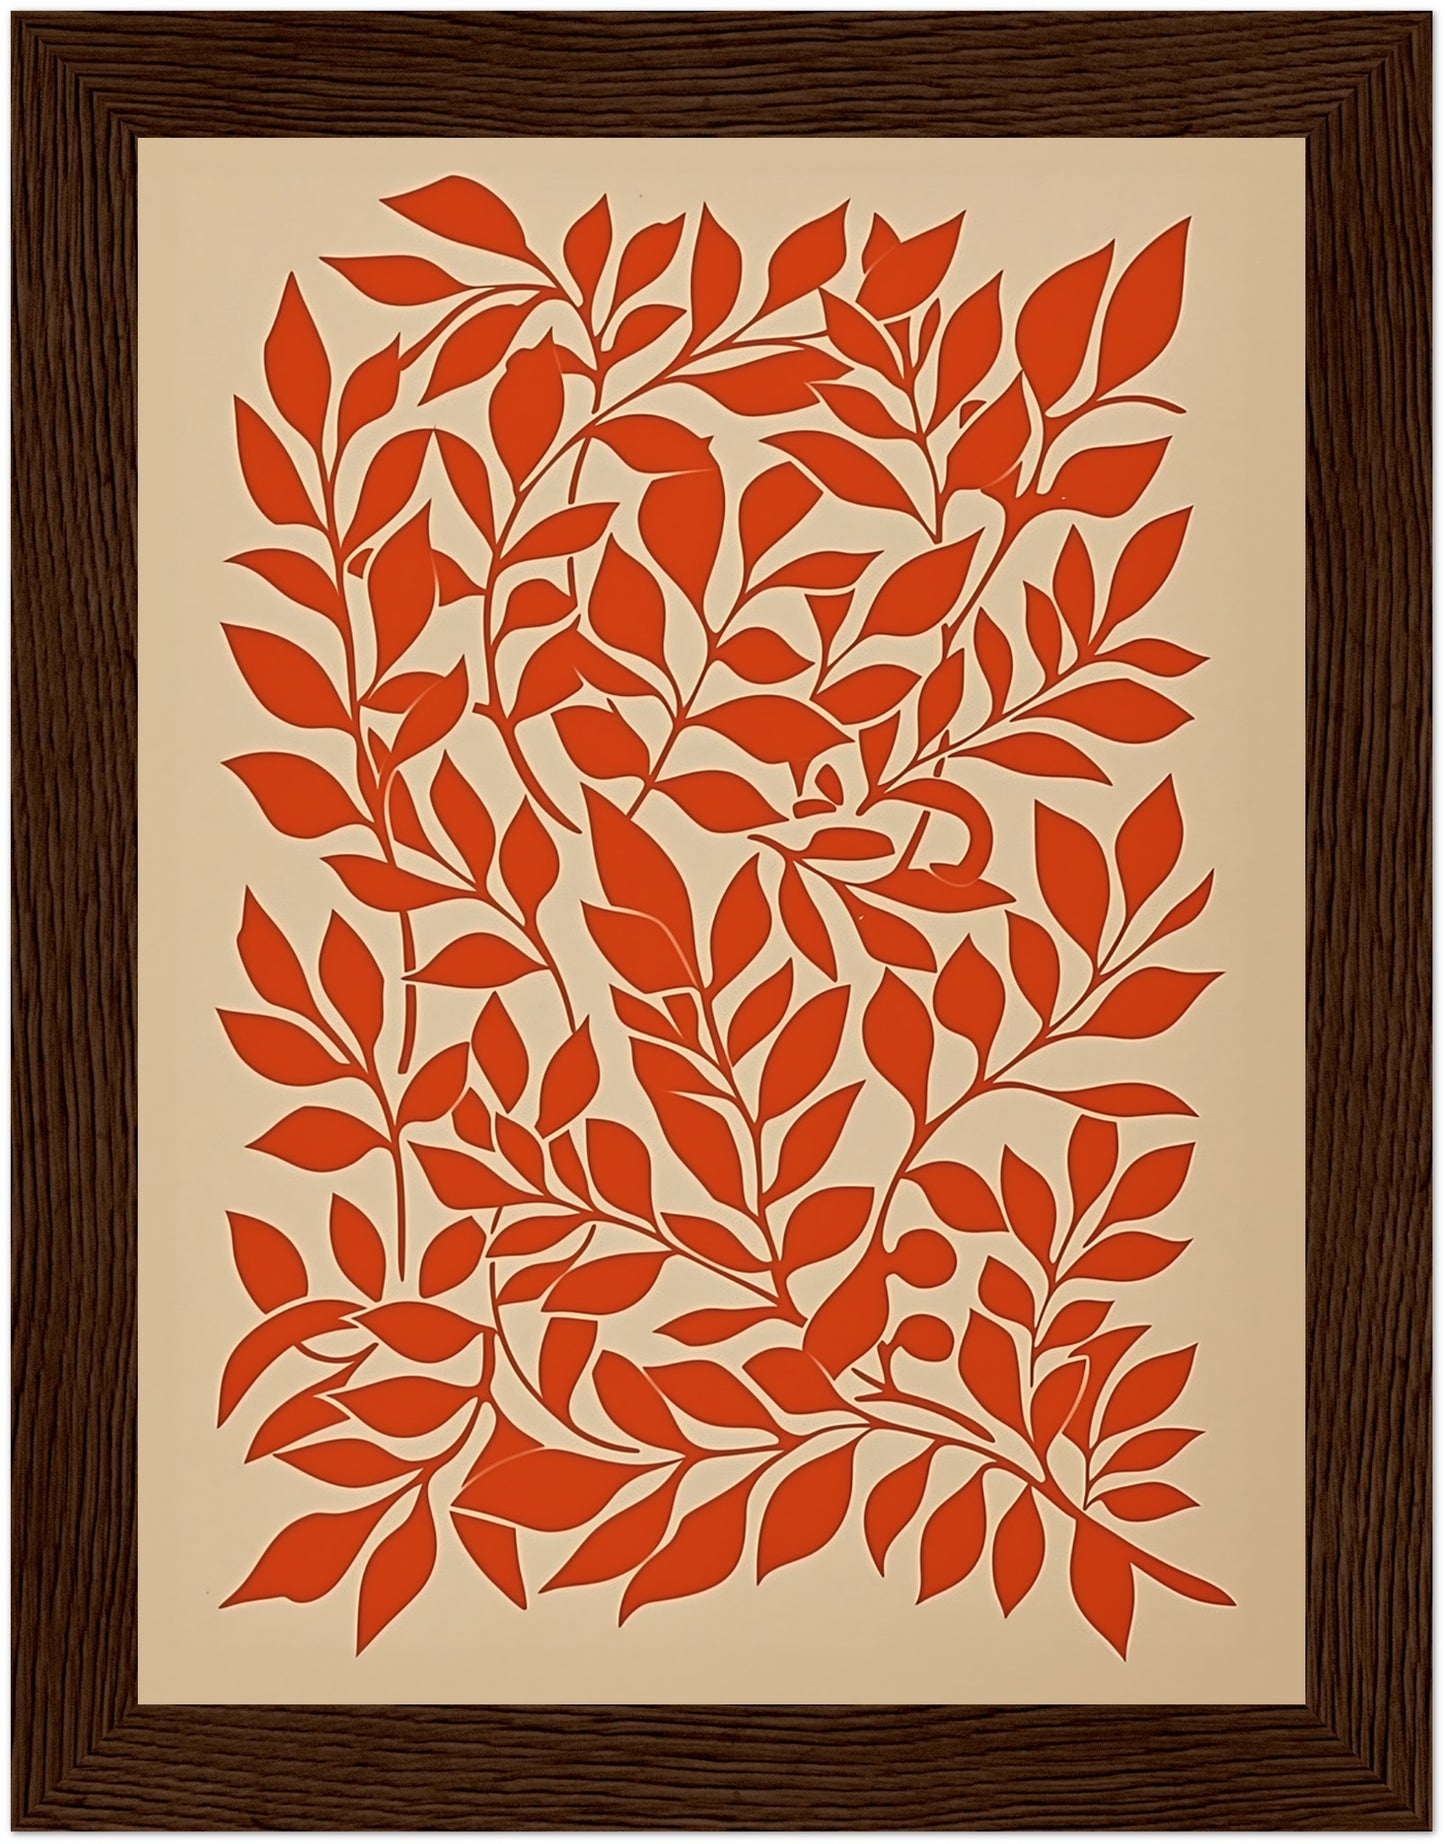 A framed artwork featuring a stylized red leaf pattern on a cream background.